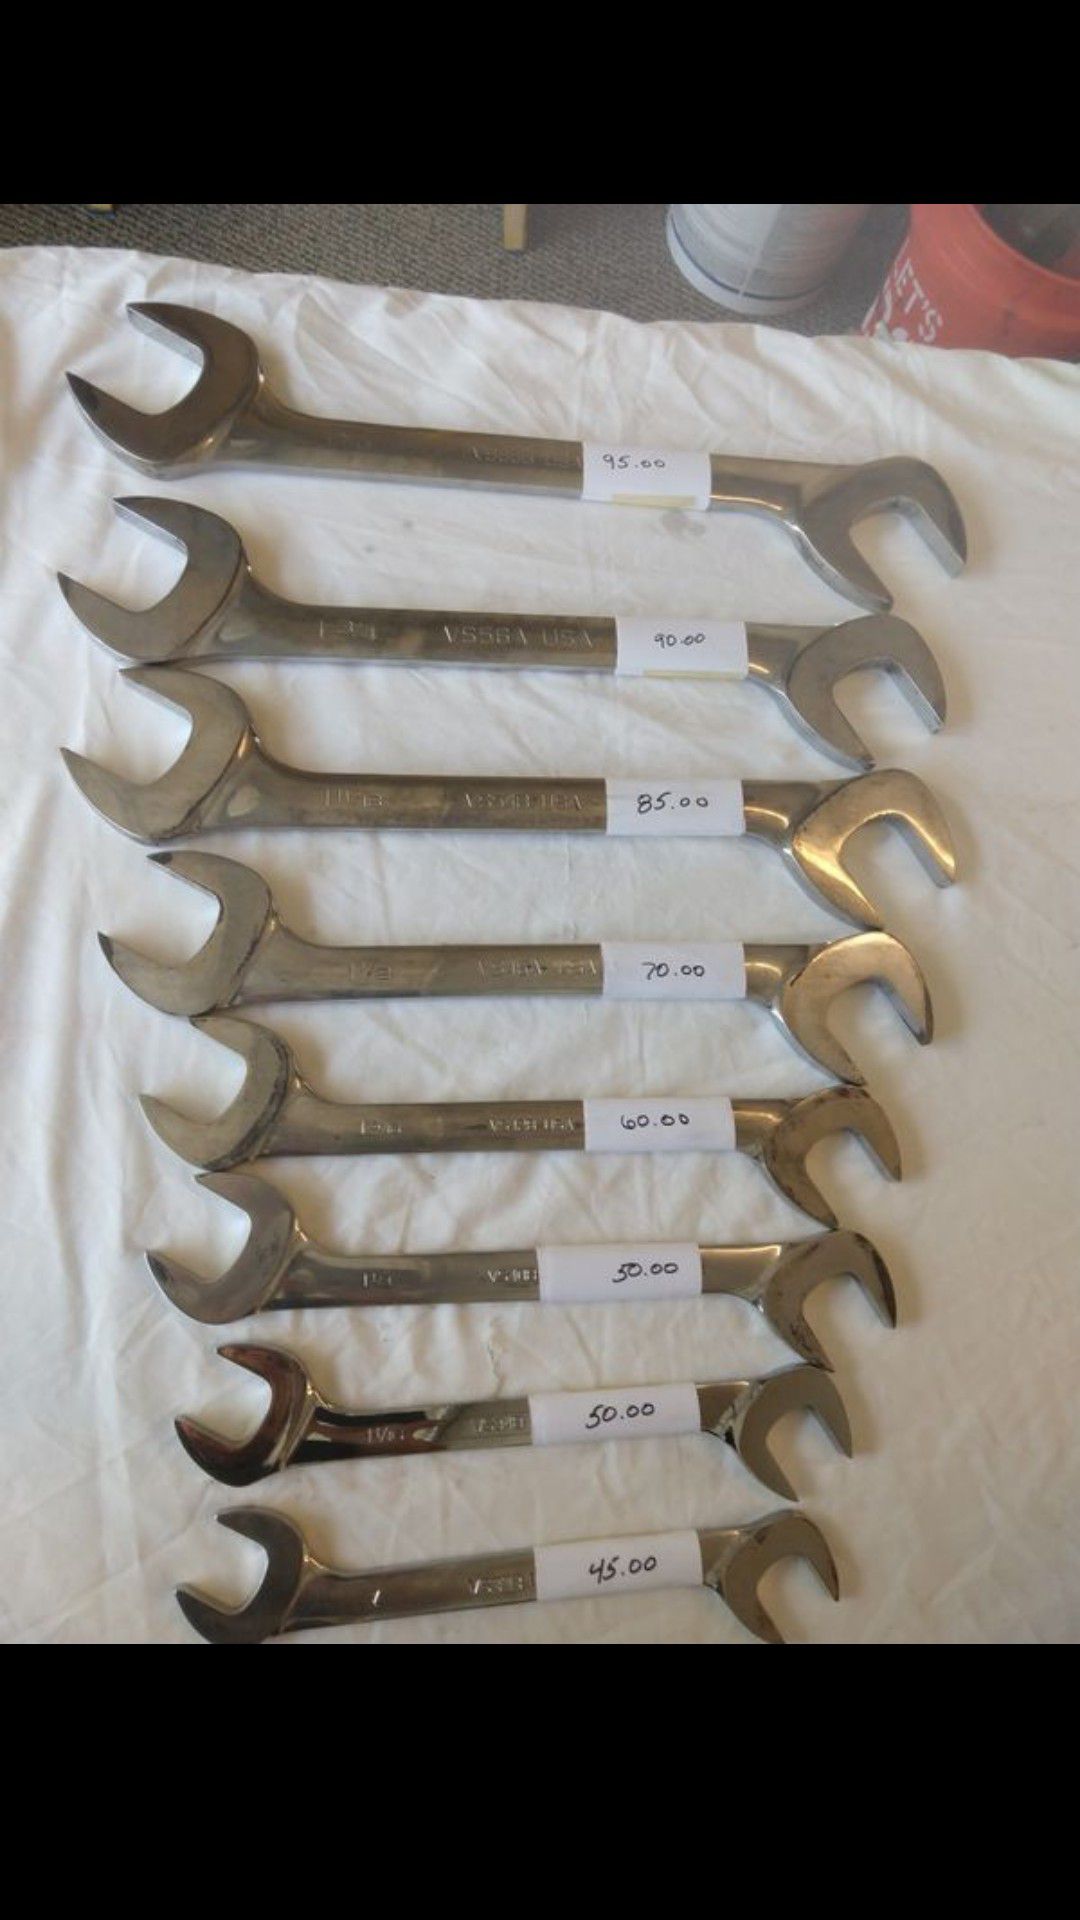 $325🙄Snap On Tools Large 4 Way Angle Head Open End Wrenches Sizes range from 1" to 1 7/8. 1", 1 1/16, 1 1/4, 1 5/16, 1 1/2, 1 11/16, 1 3/4, 1 7/8.